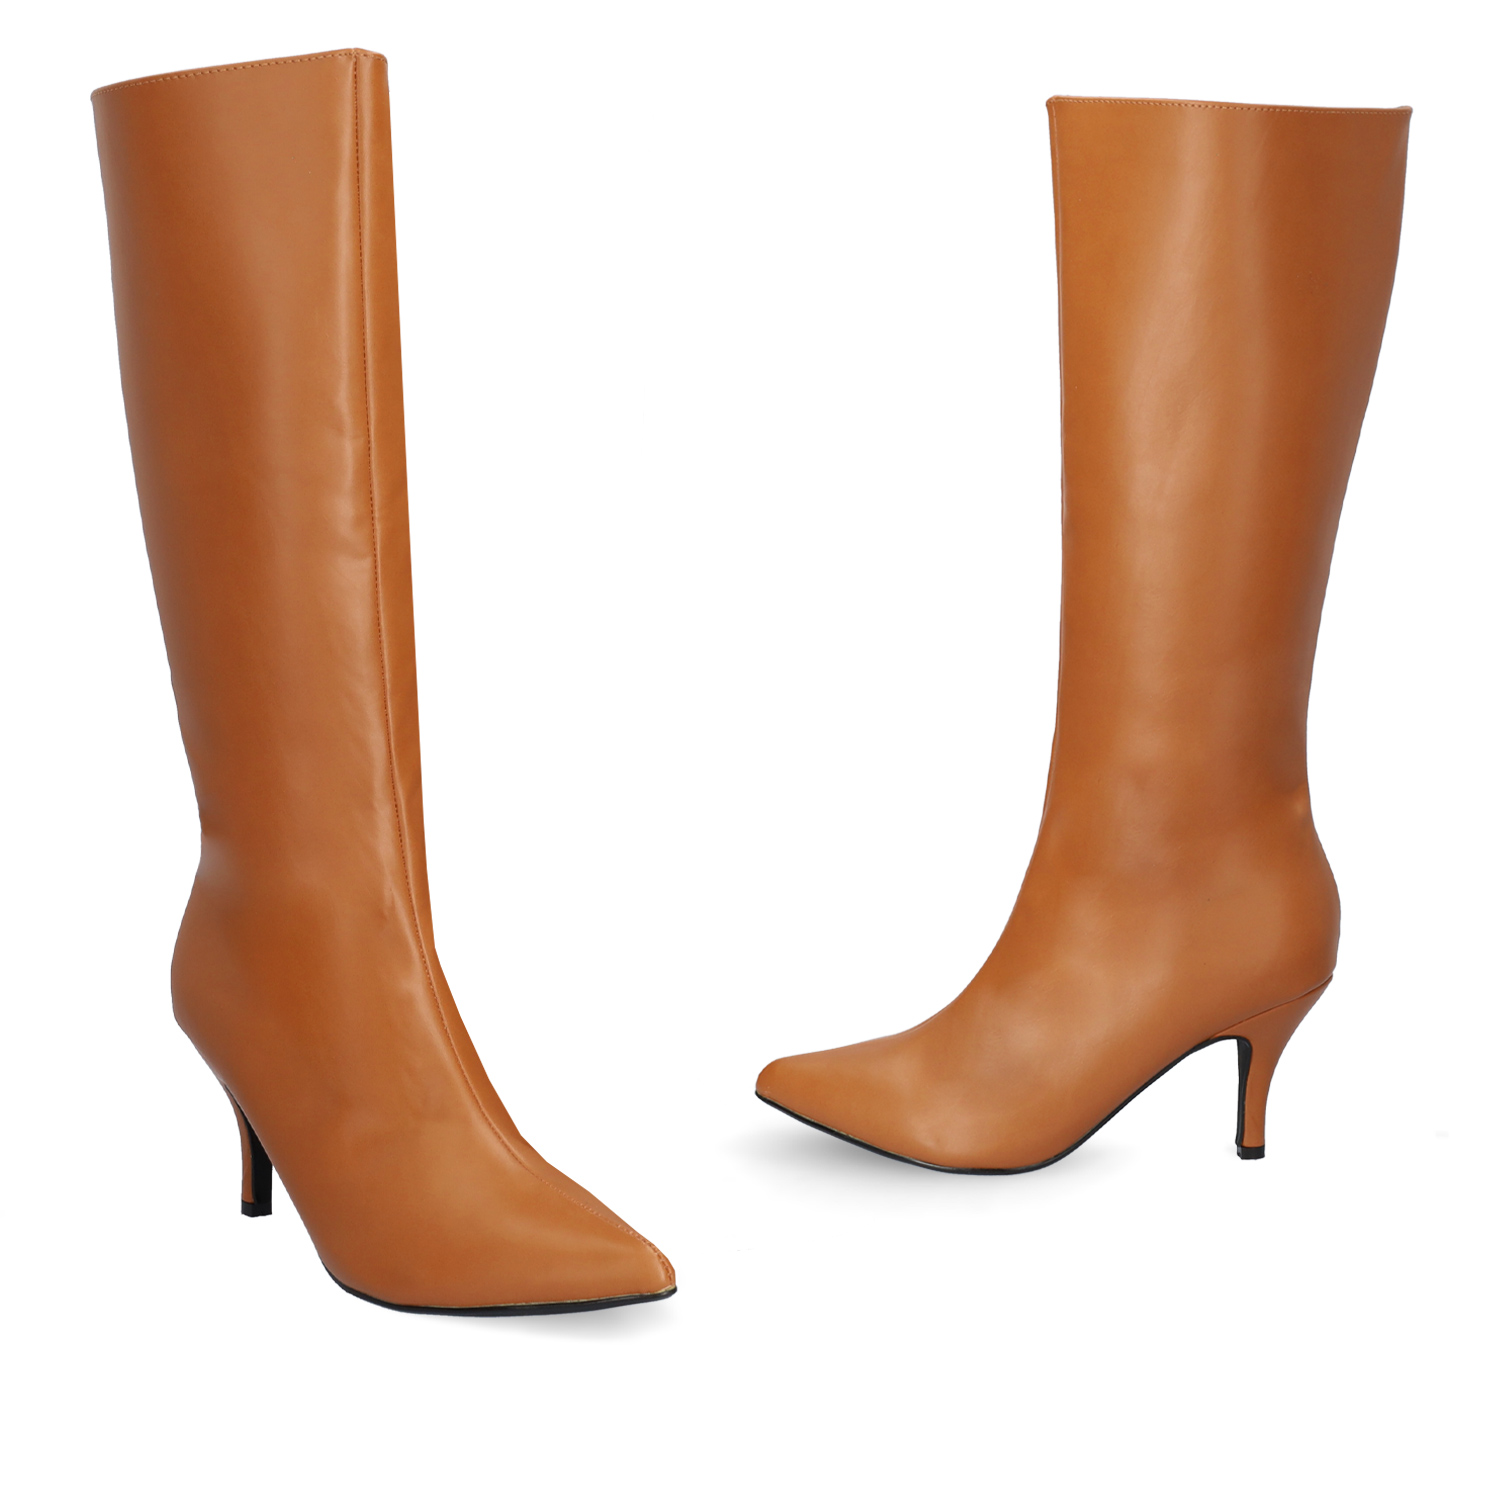 Smooth camel colored faux leather boots 